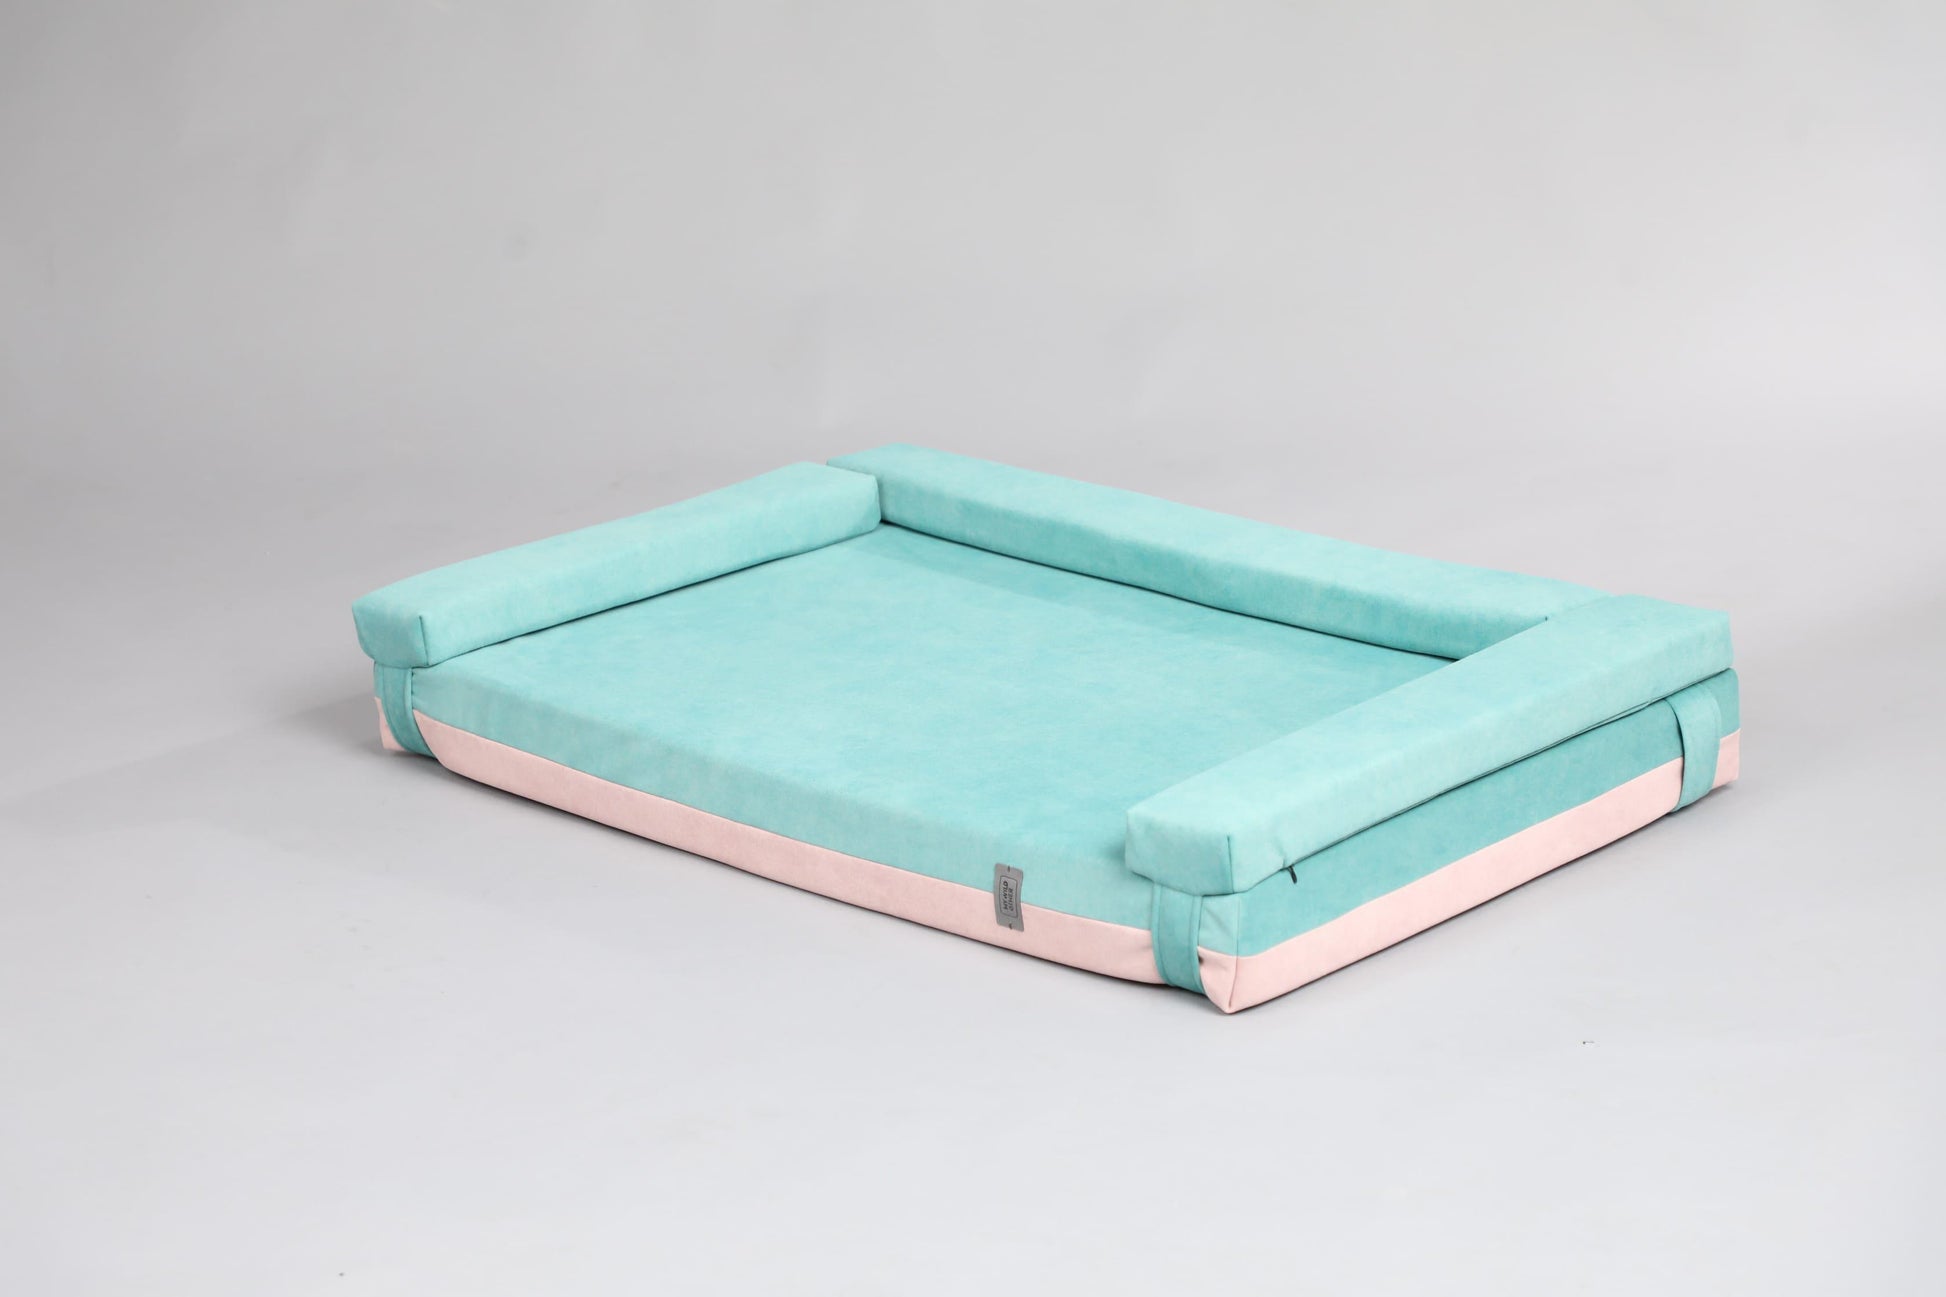 Transformer dog bed | Extra comfort & support | 2-sided | MINT GREEN+FLAMINGO PINK - premium dog goods handmade in Europe by My Wild Other